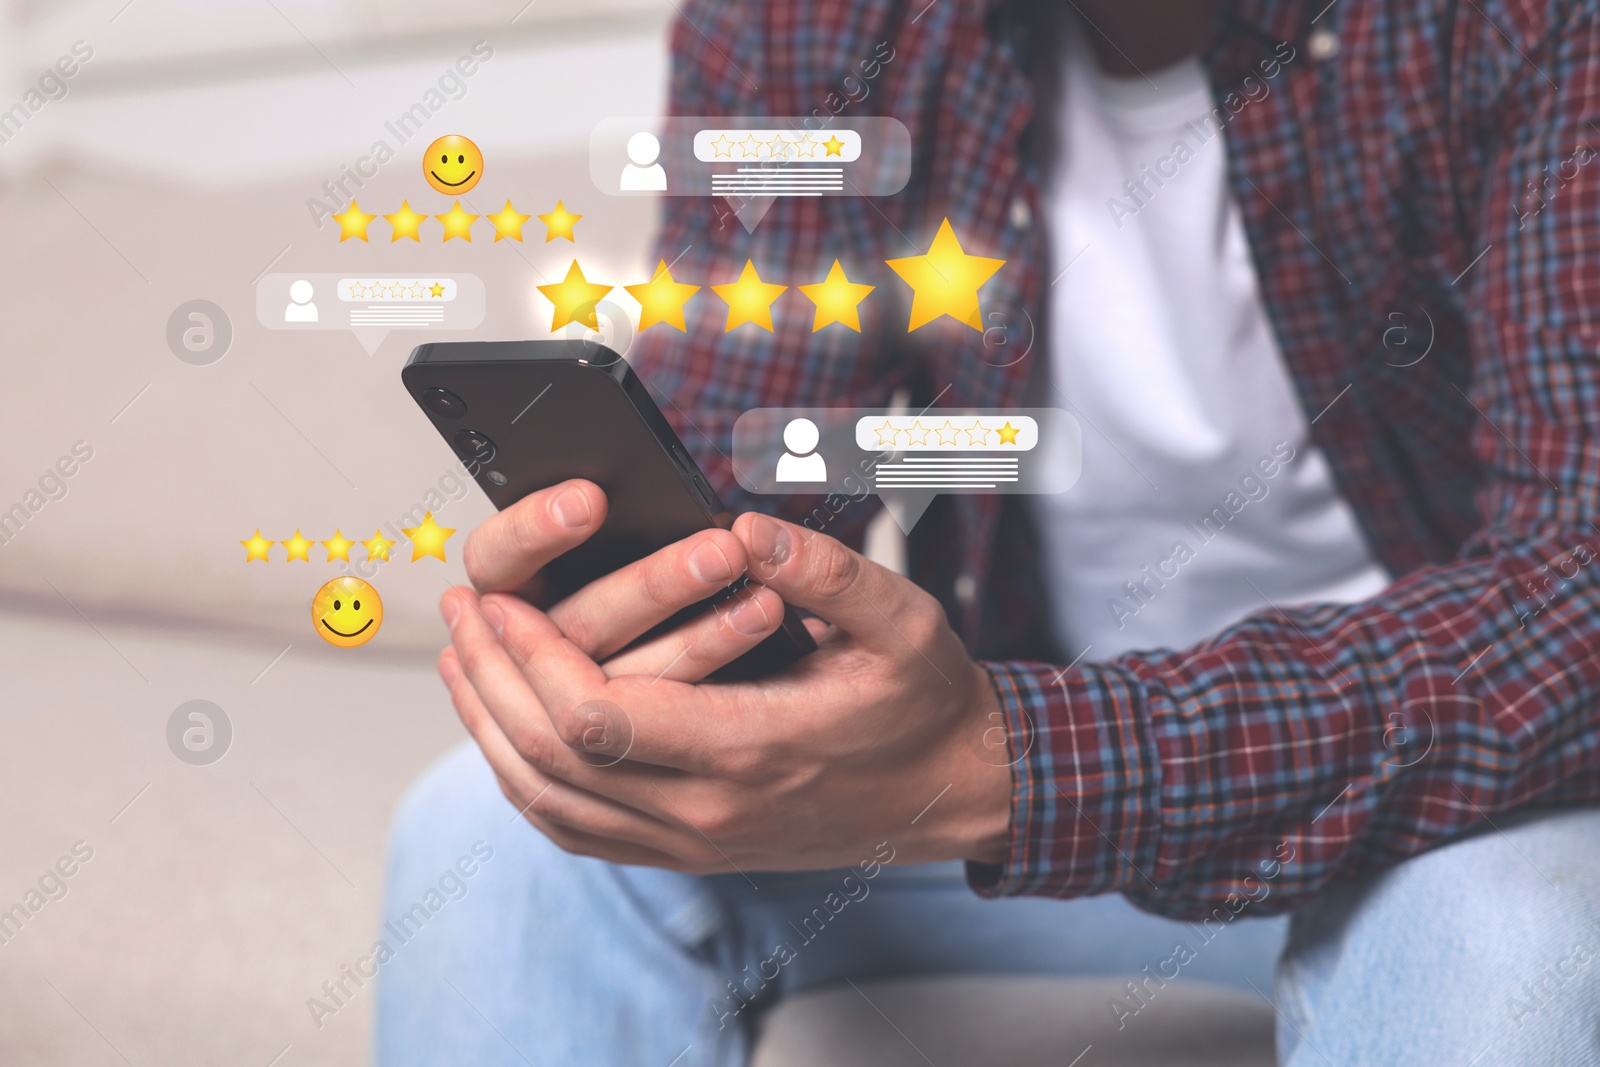 Image of Man leaving service feedback with smartphone outdoors, closeup. Stars and emoticons near device